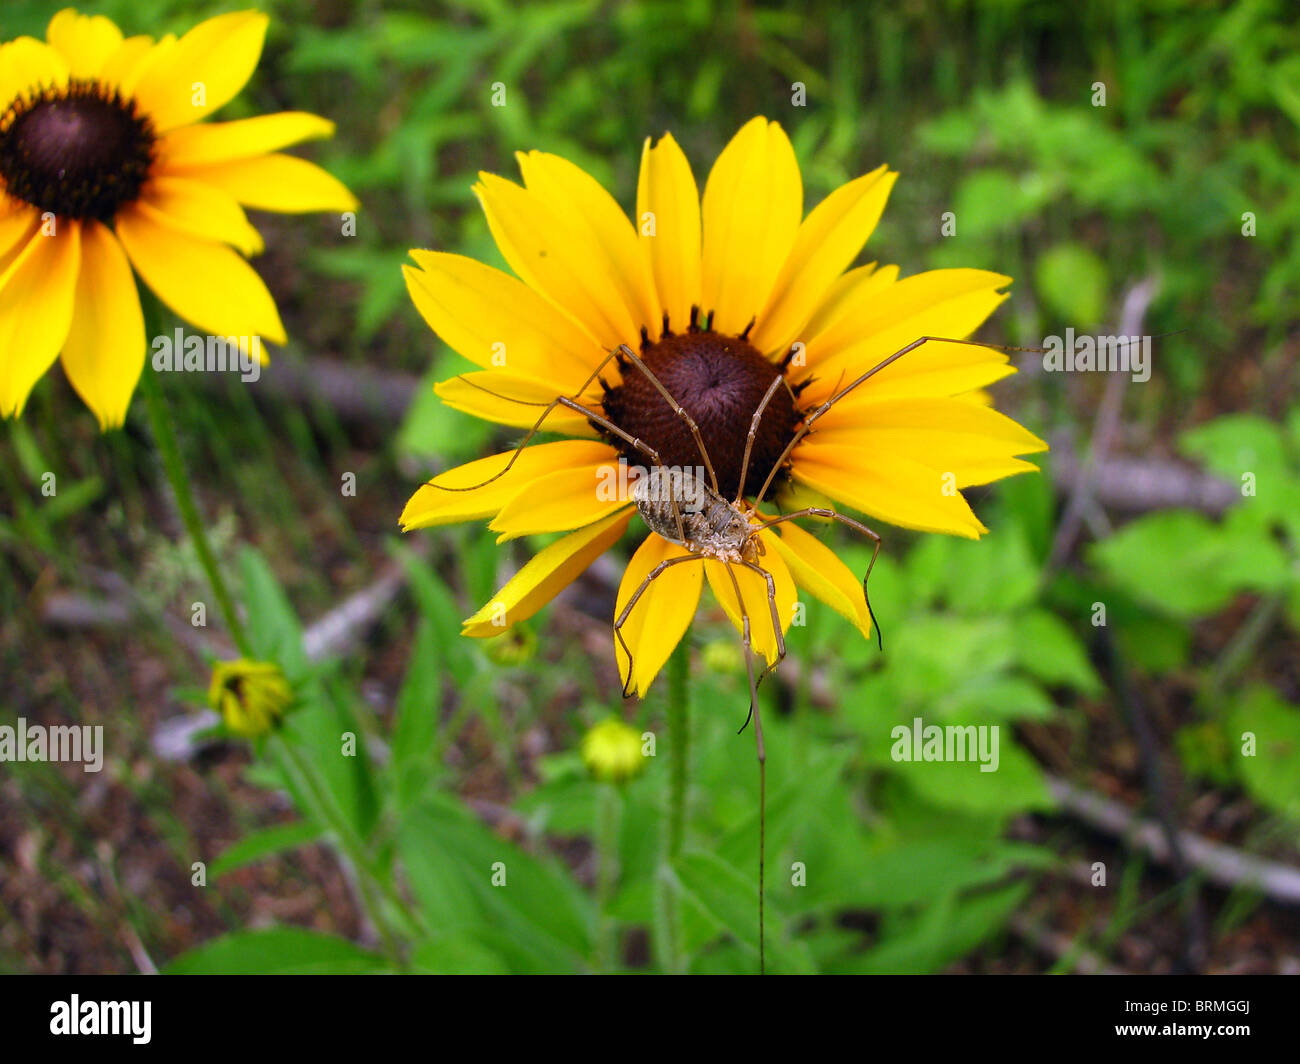 Daddy Longlegs (Harvestman) Spider on a flower in Ontario, Canada Stock Photo